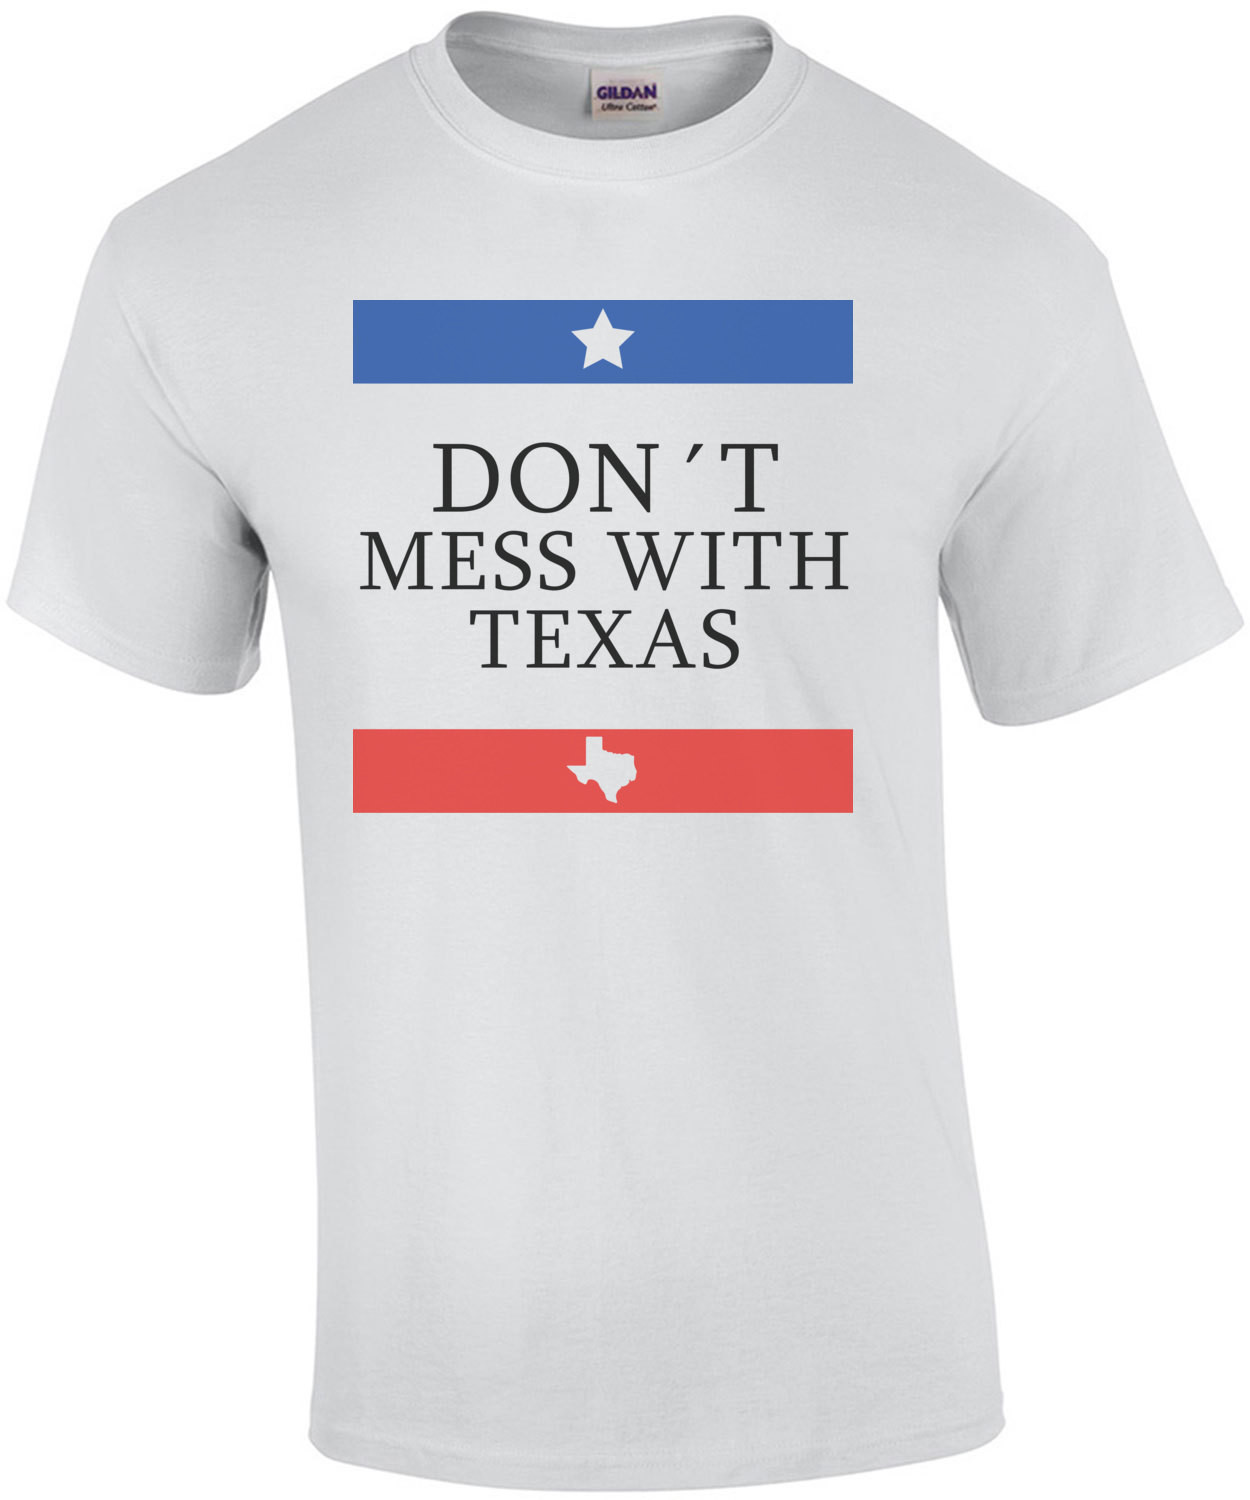 Don't mess with Texas - Texas T-Shirt